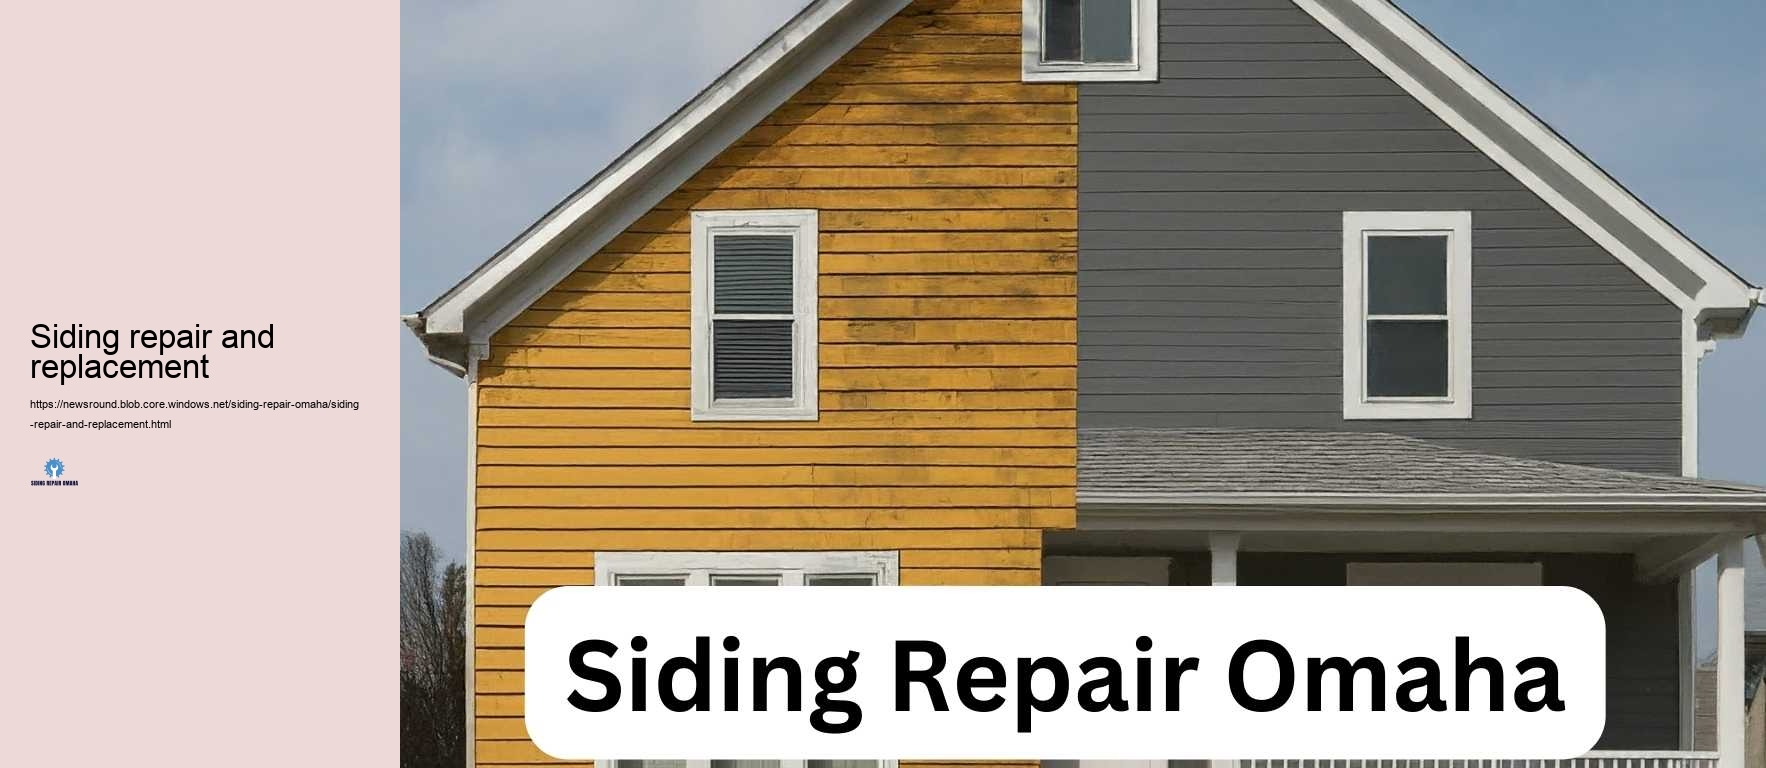 Siding repair and replacement